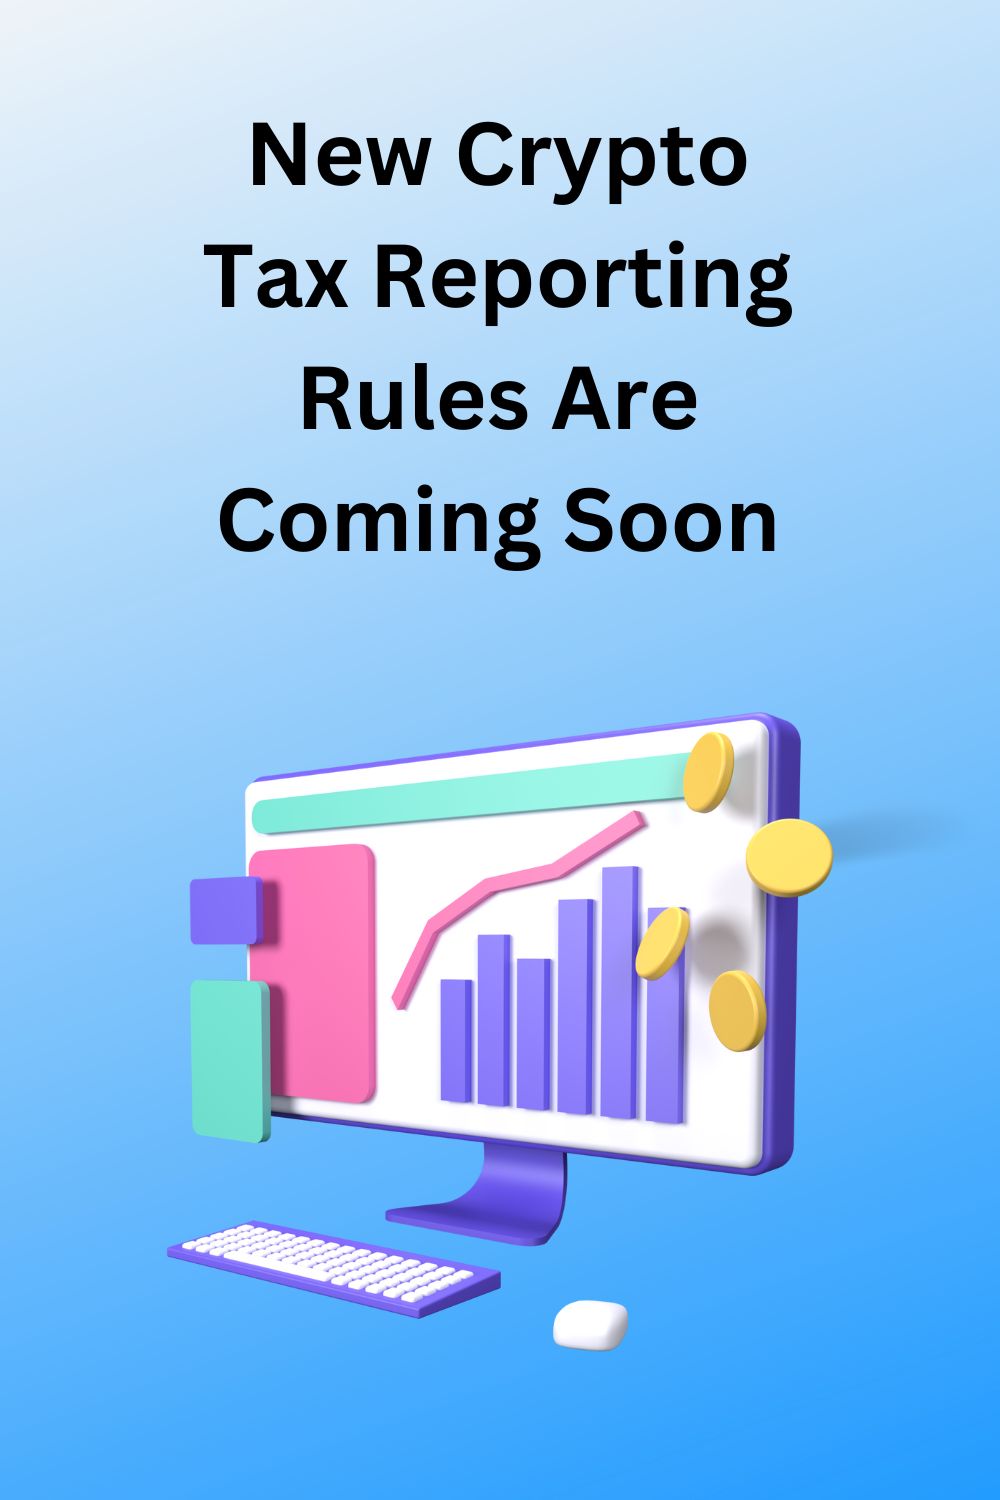 New Crypto Tax Reporting Rules Are Coming Soon